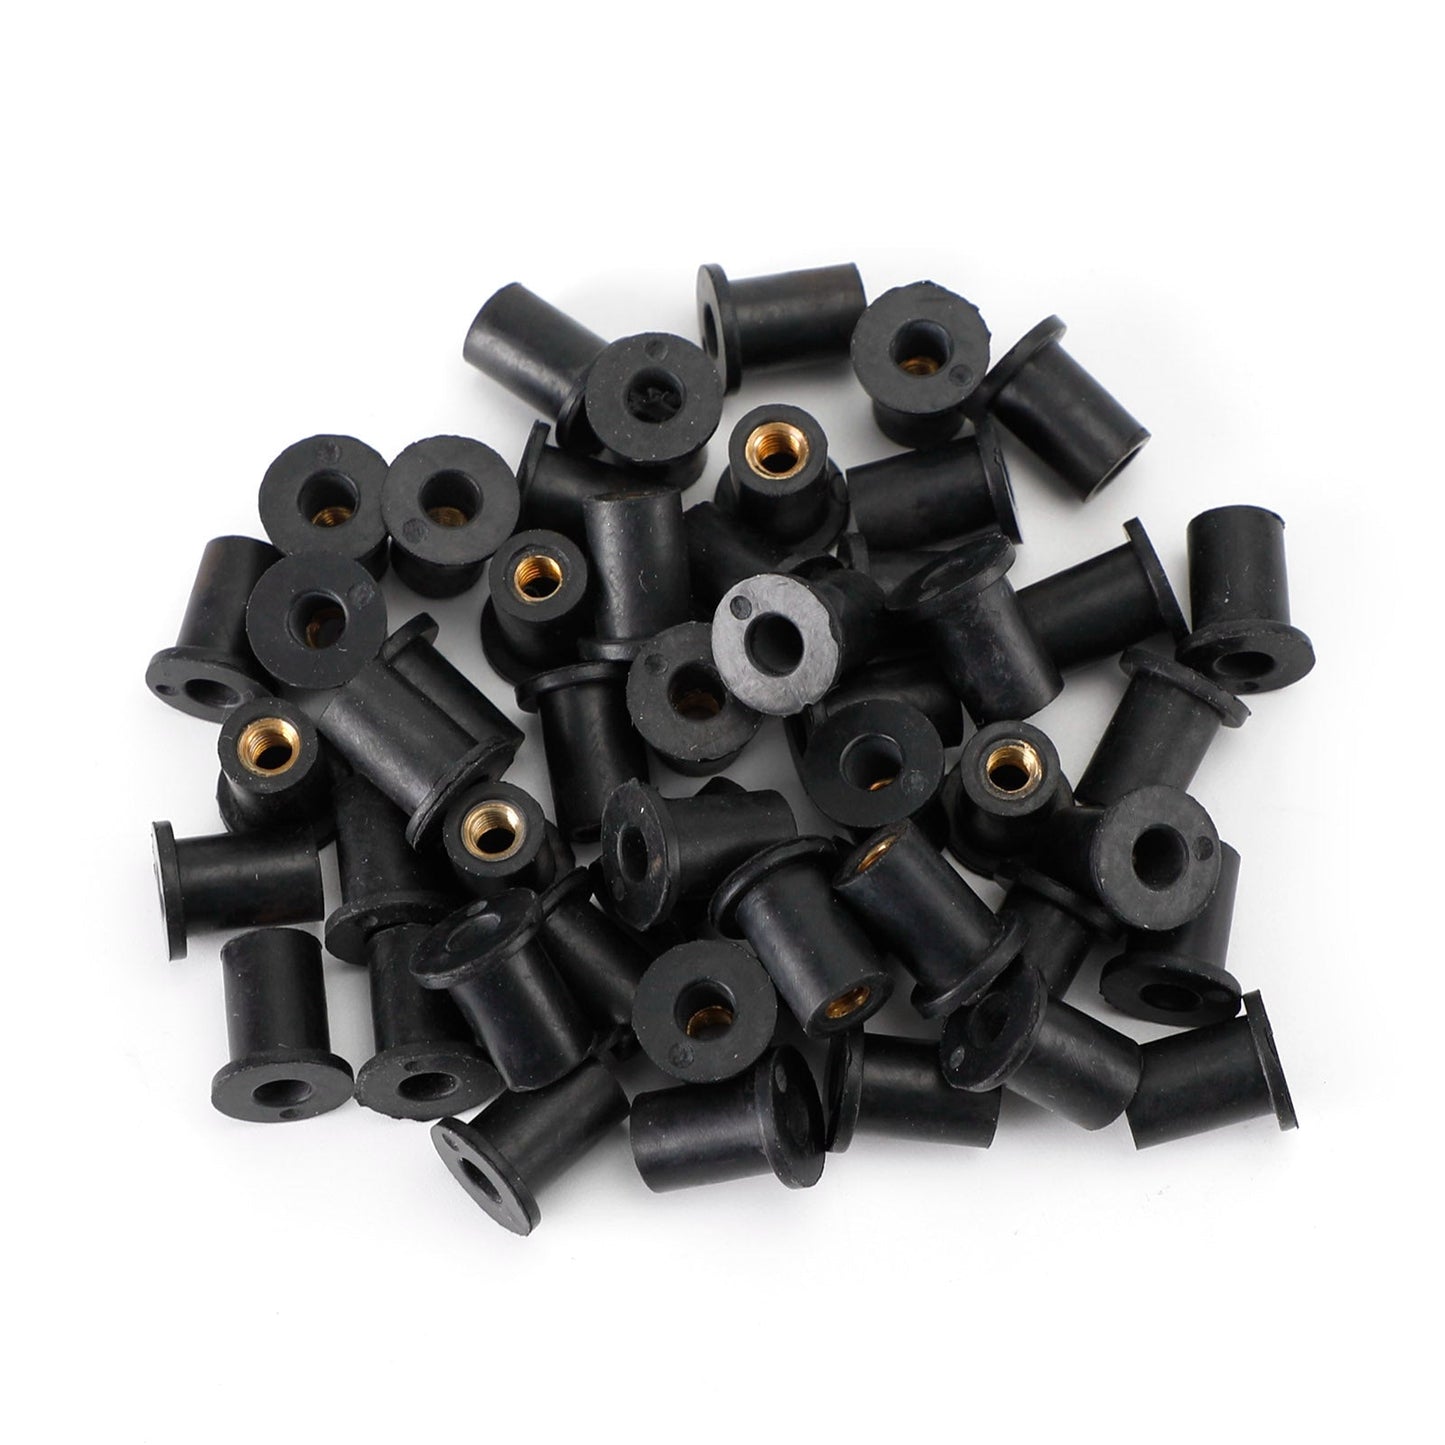 M4 Rubber Well Nuts Wellnuts for Fairing & Screen Fixing Pack of 50 - 8mm Hole